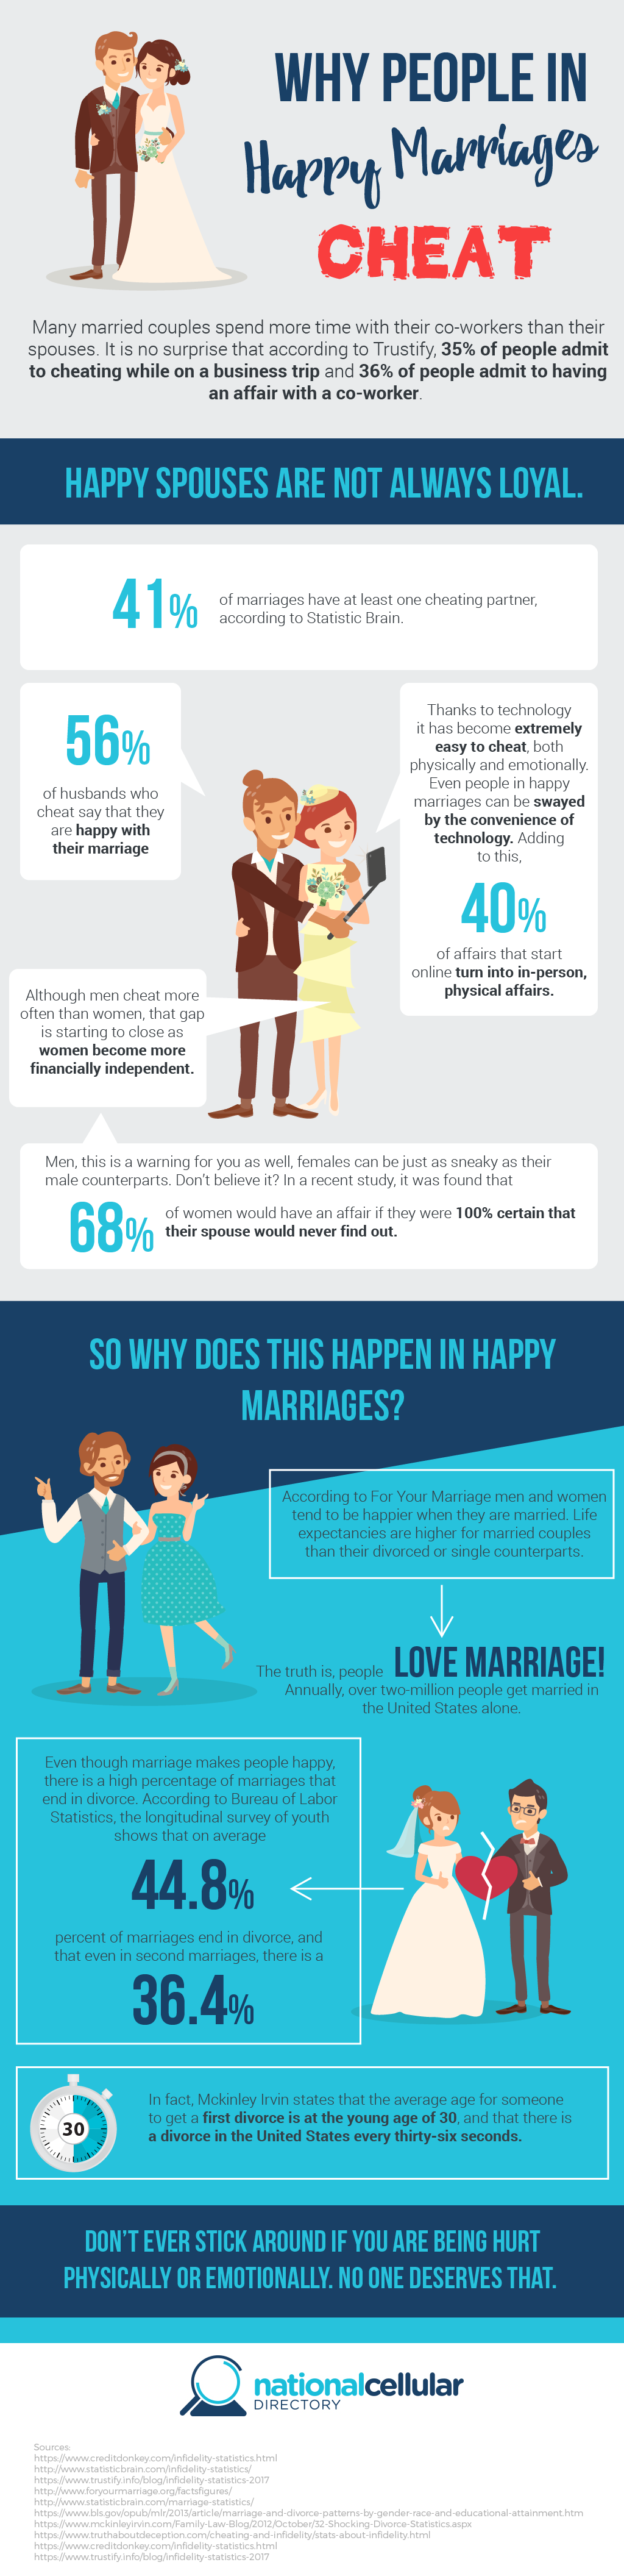 Why People in Happy Marriages Cheat (Infographic)